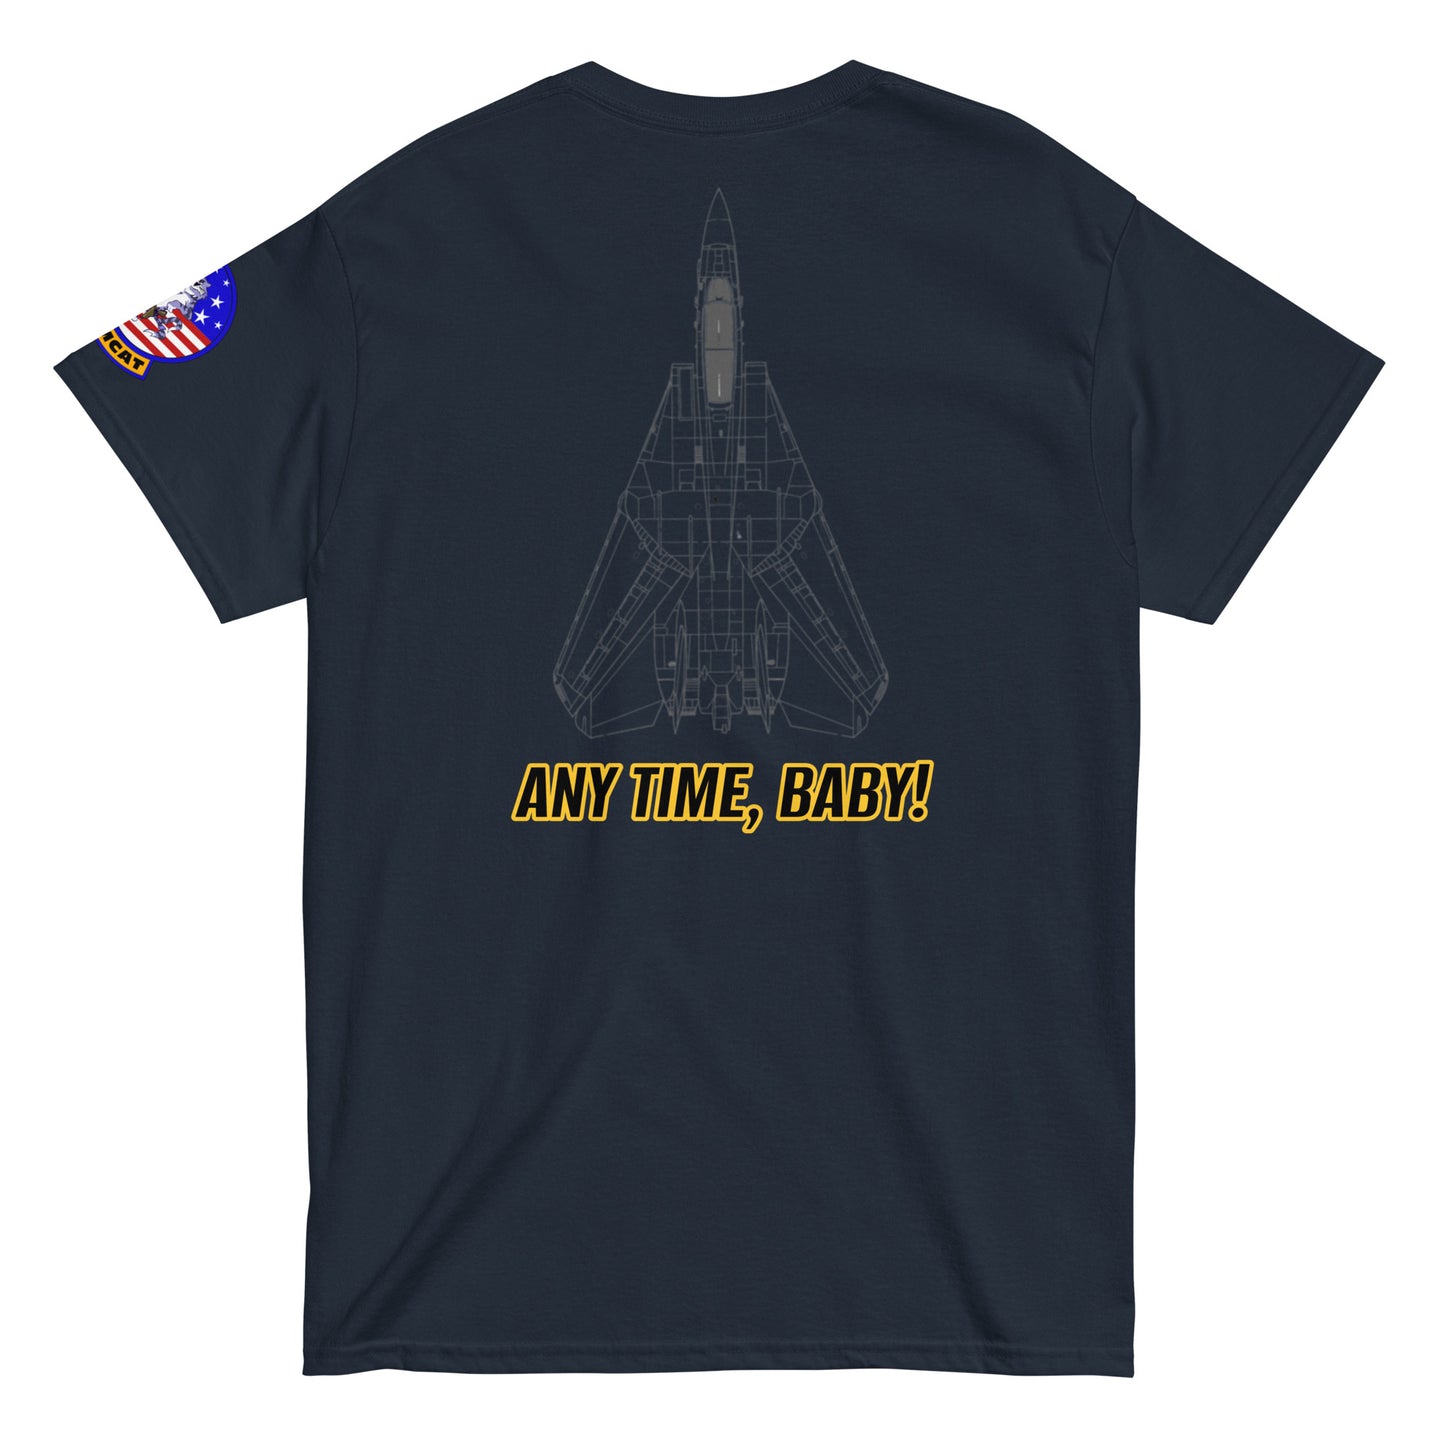 US NAVY F-14 TOMCAT FIGHTER ANY TIME BABY T-SHIRT